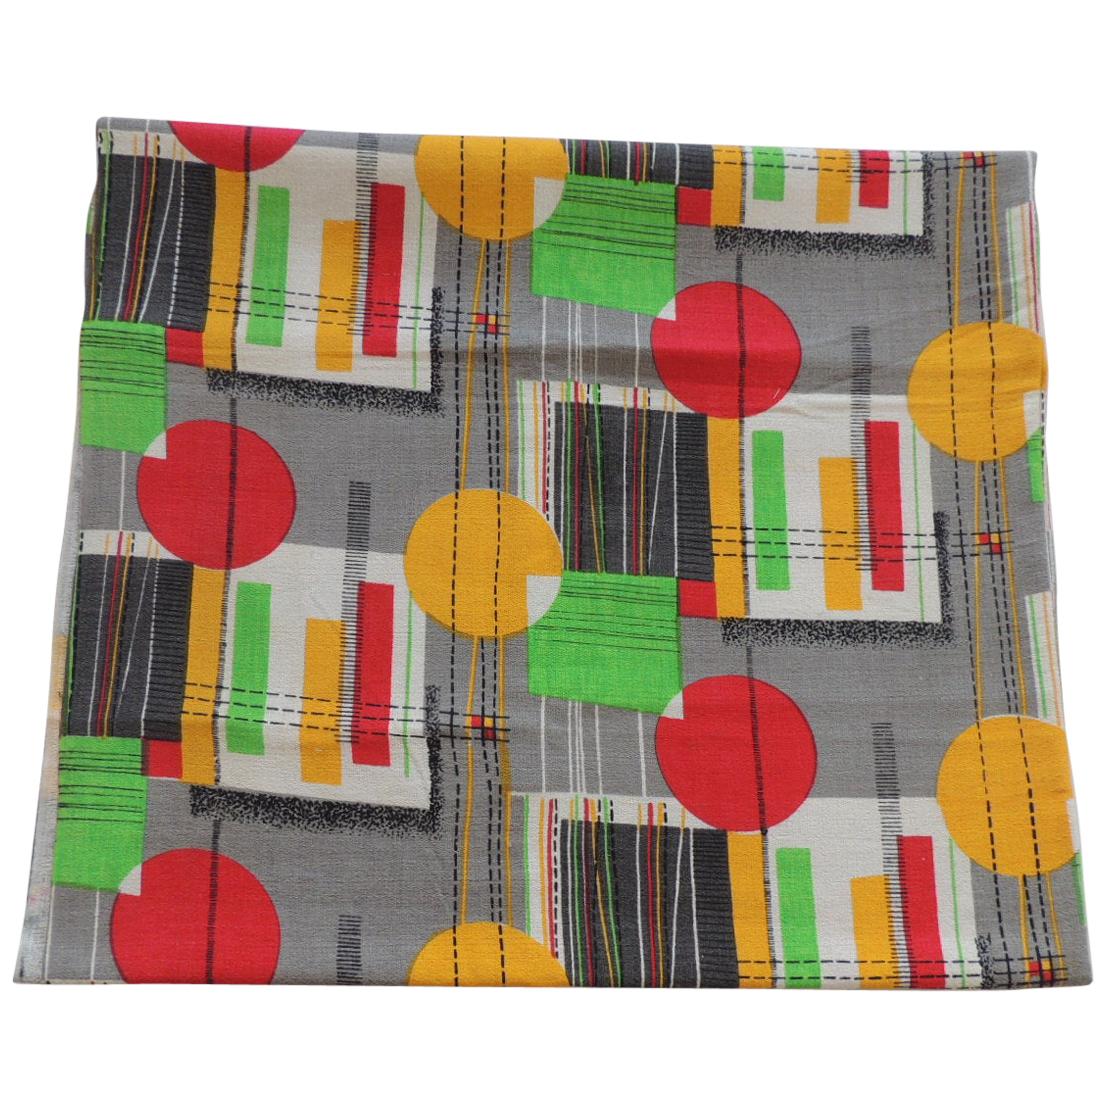 Fabric by the Yard: Printed Cotton Midcentury "MOD" Multi Color Fabric